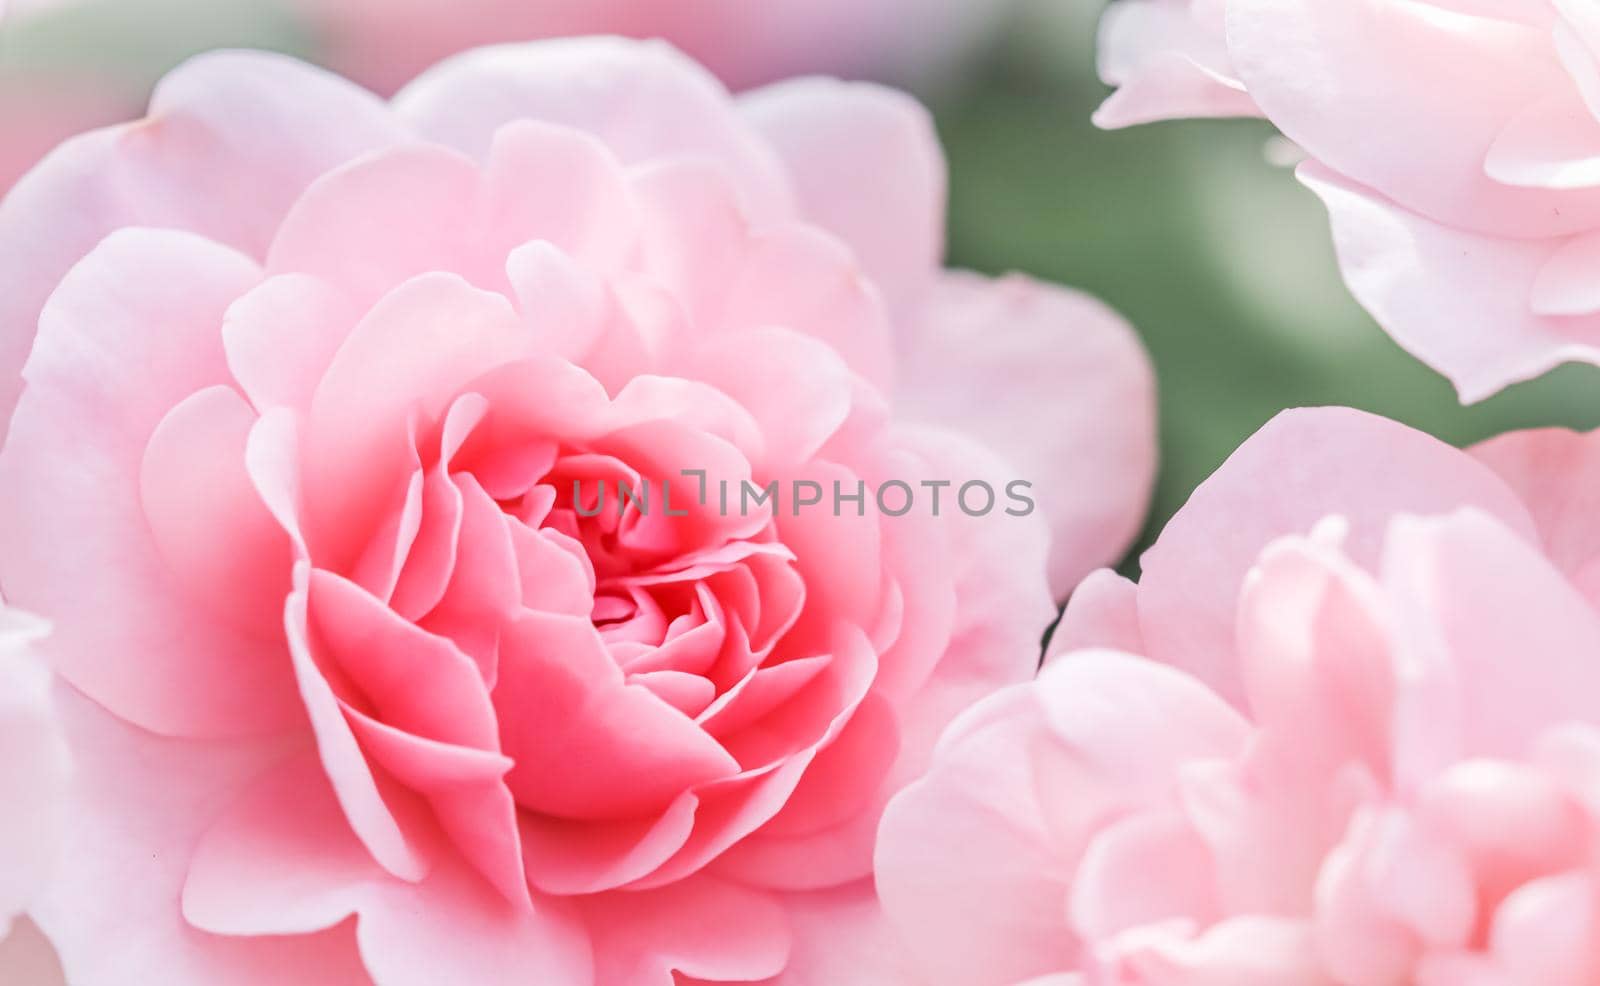 Soft focus, abstract floral background, pink rose flower petals. Macro flowers backdrop for holiday design by Olayola